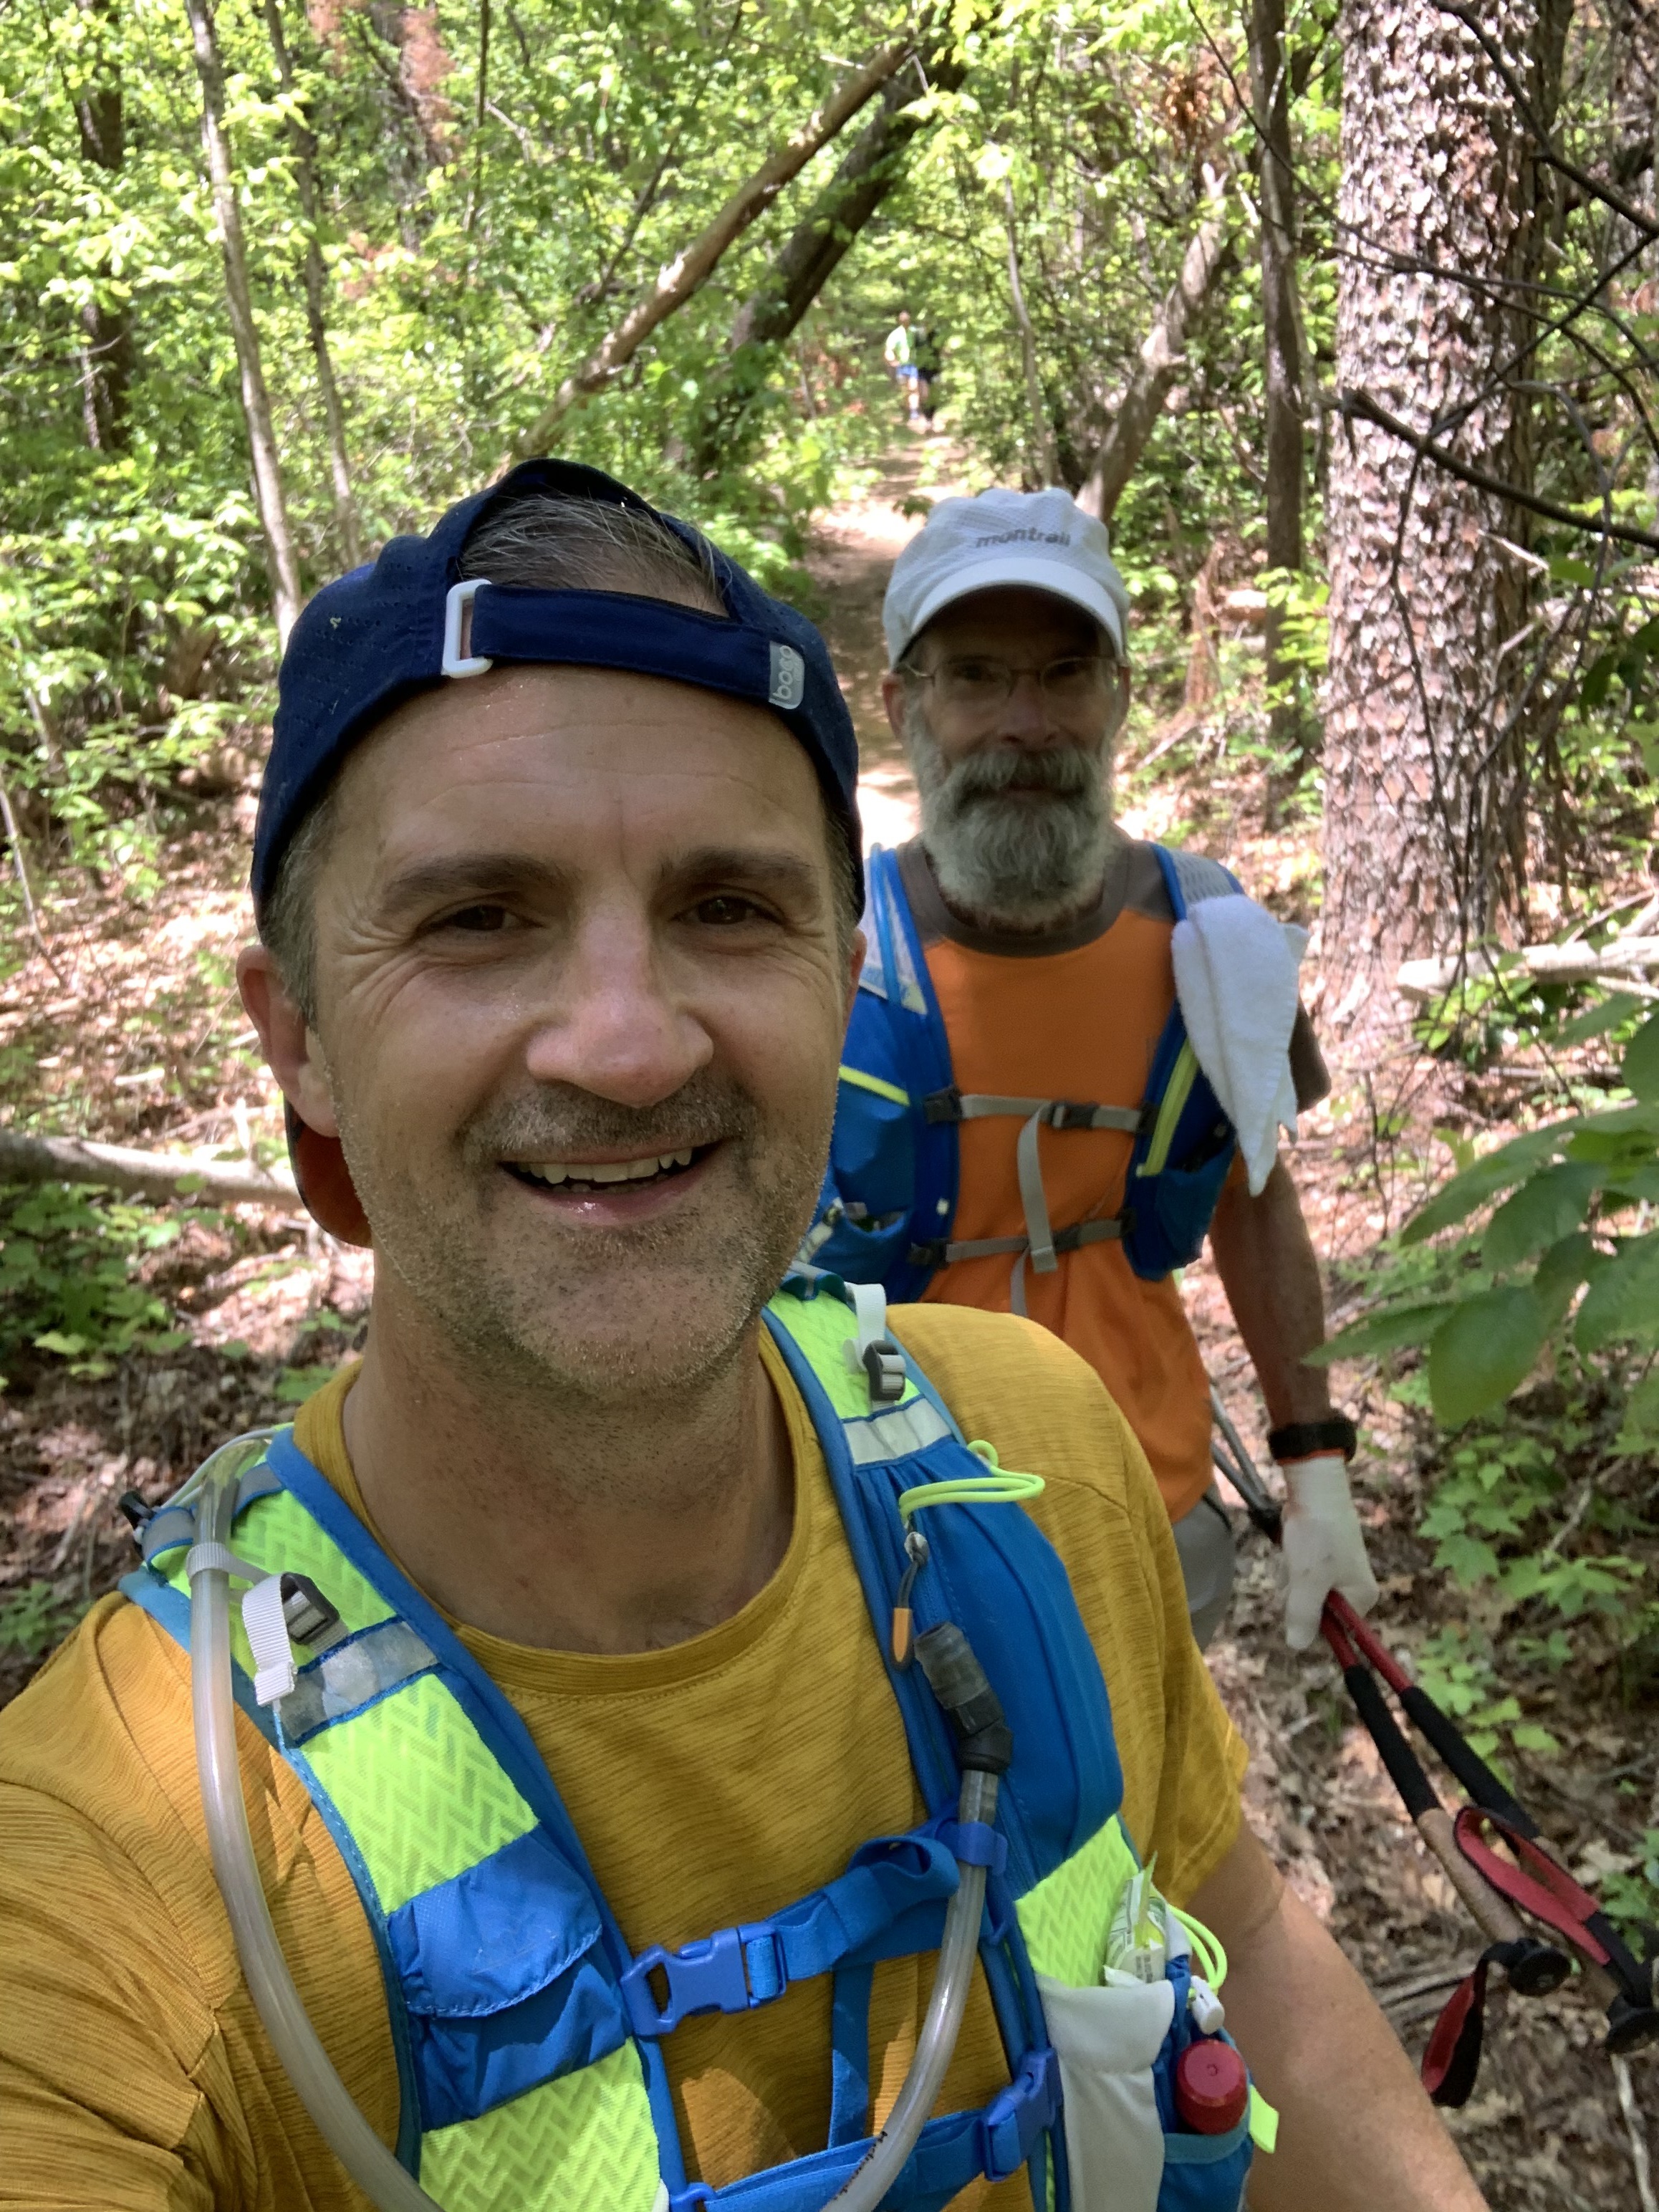 Selfie of Team Leader Michael Hopton and his father hiking on a trail.